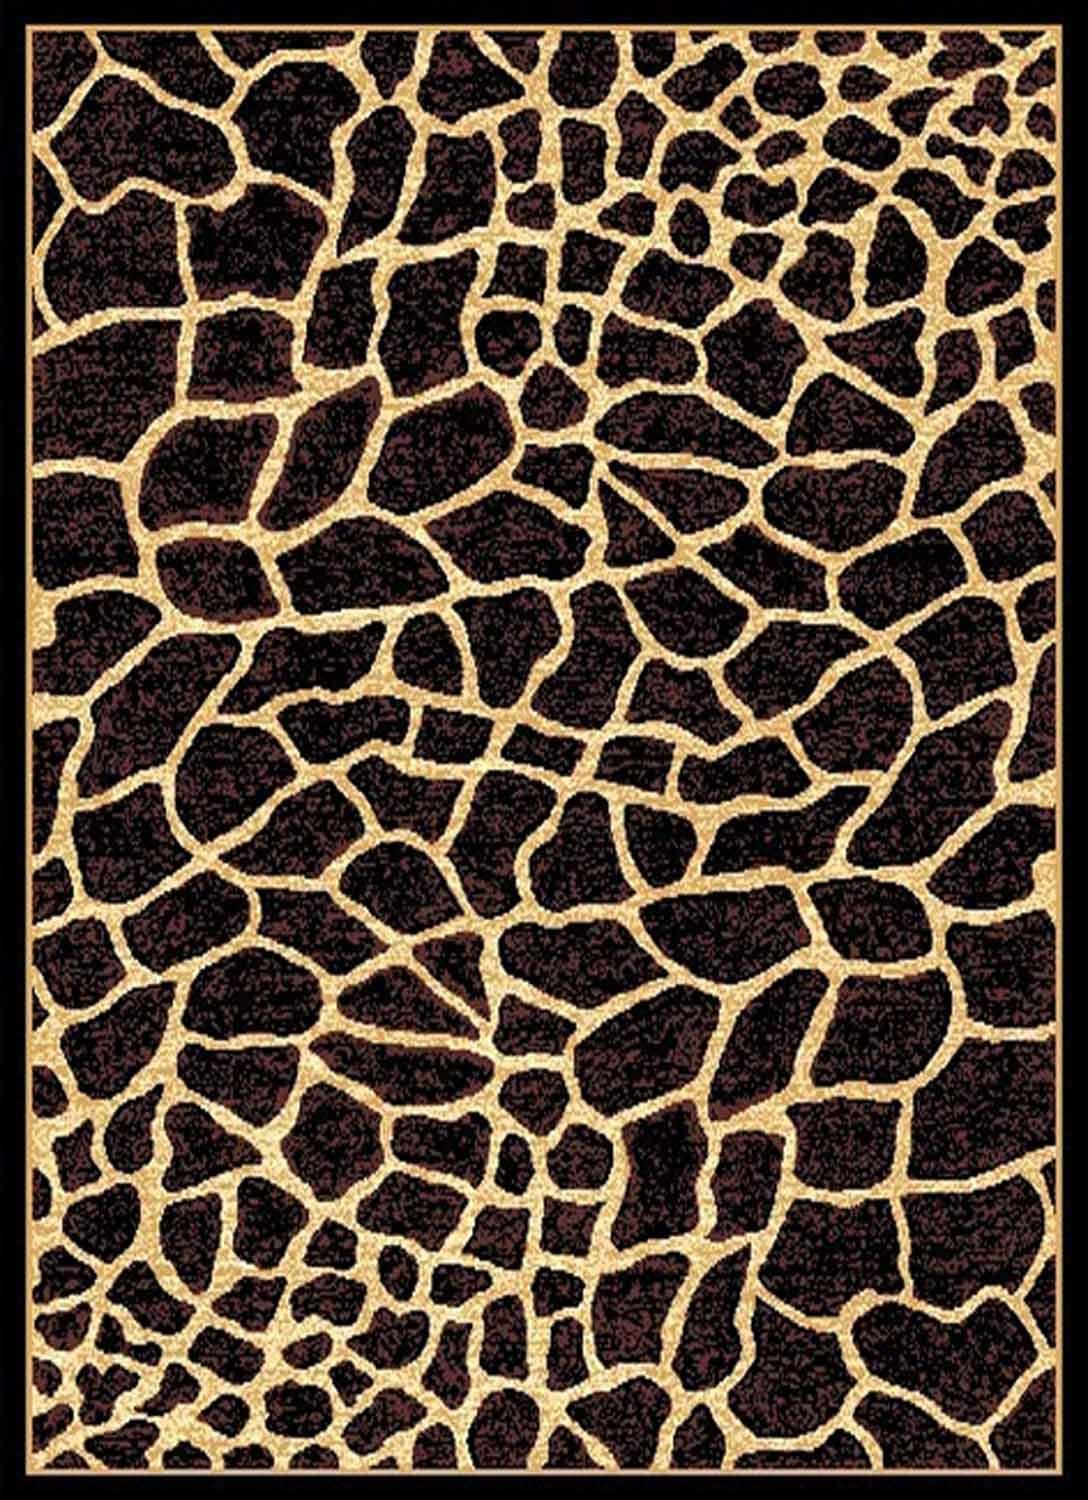 Large Contemporary Area Rug Printed Giraffe Skin for Indoor Decoration & Living Room (Approx. 2ft X 3ft)